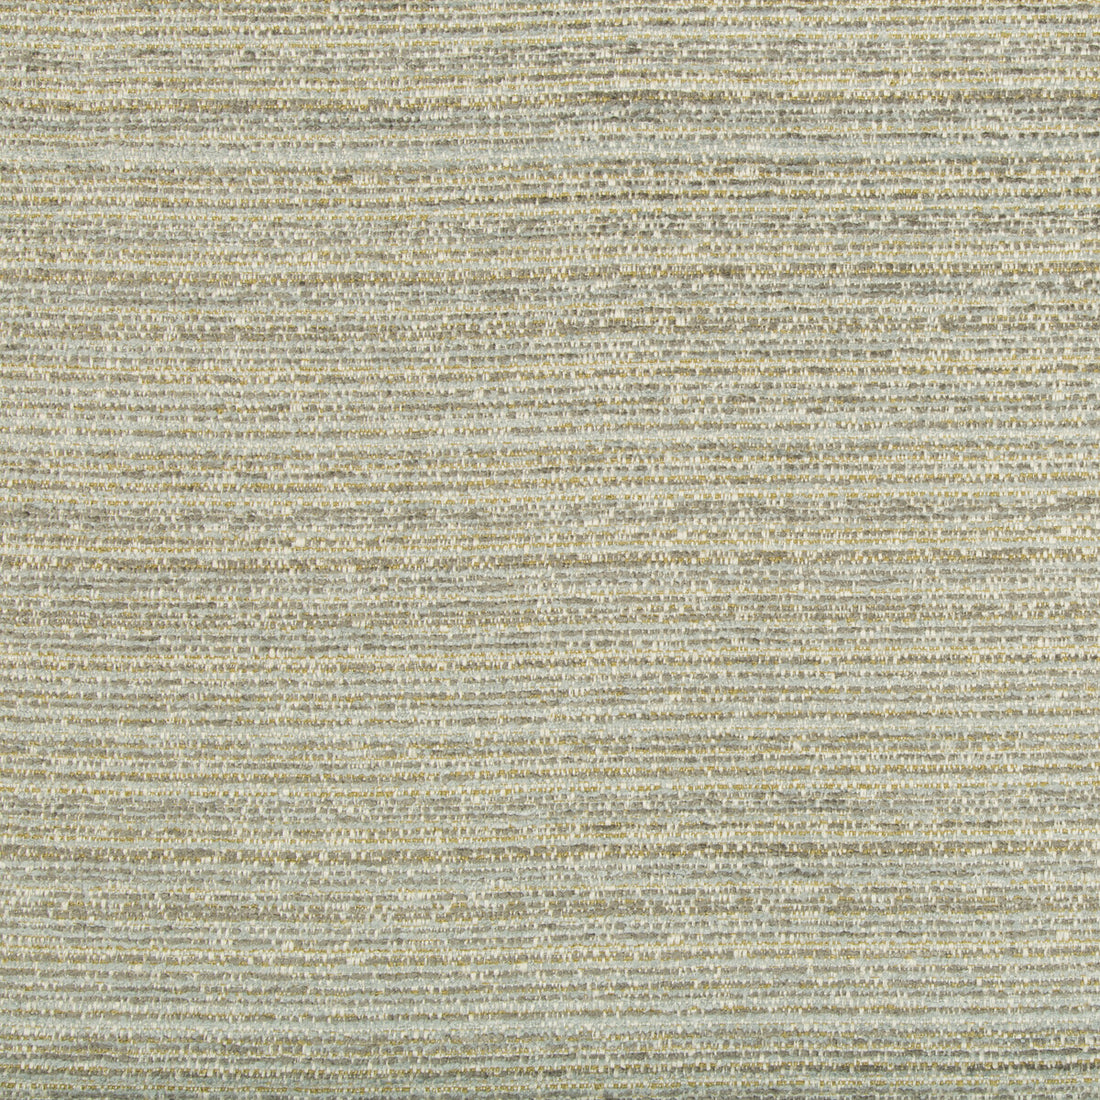 Kravet Design fabric in 34995-1523 color - pattern 34995.1523.0 - by Kravet Design in the Performance Crypton Home collection